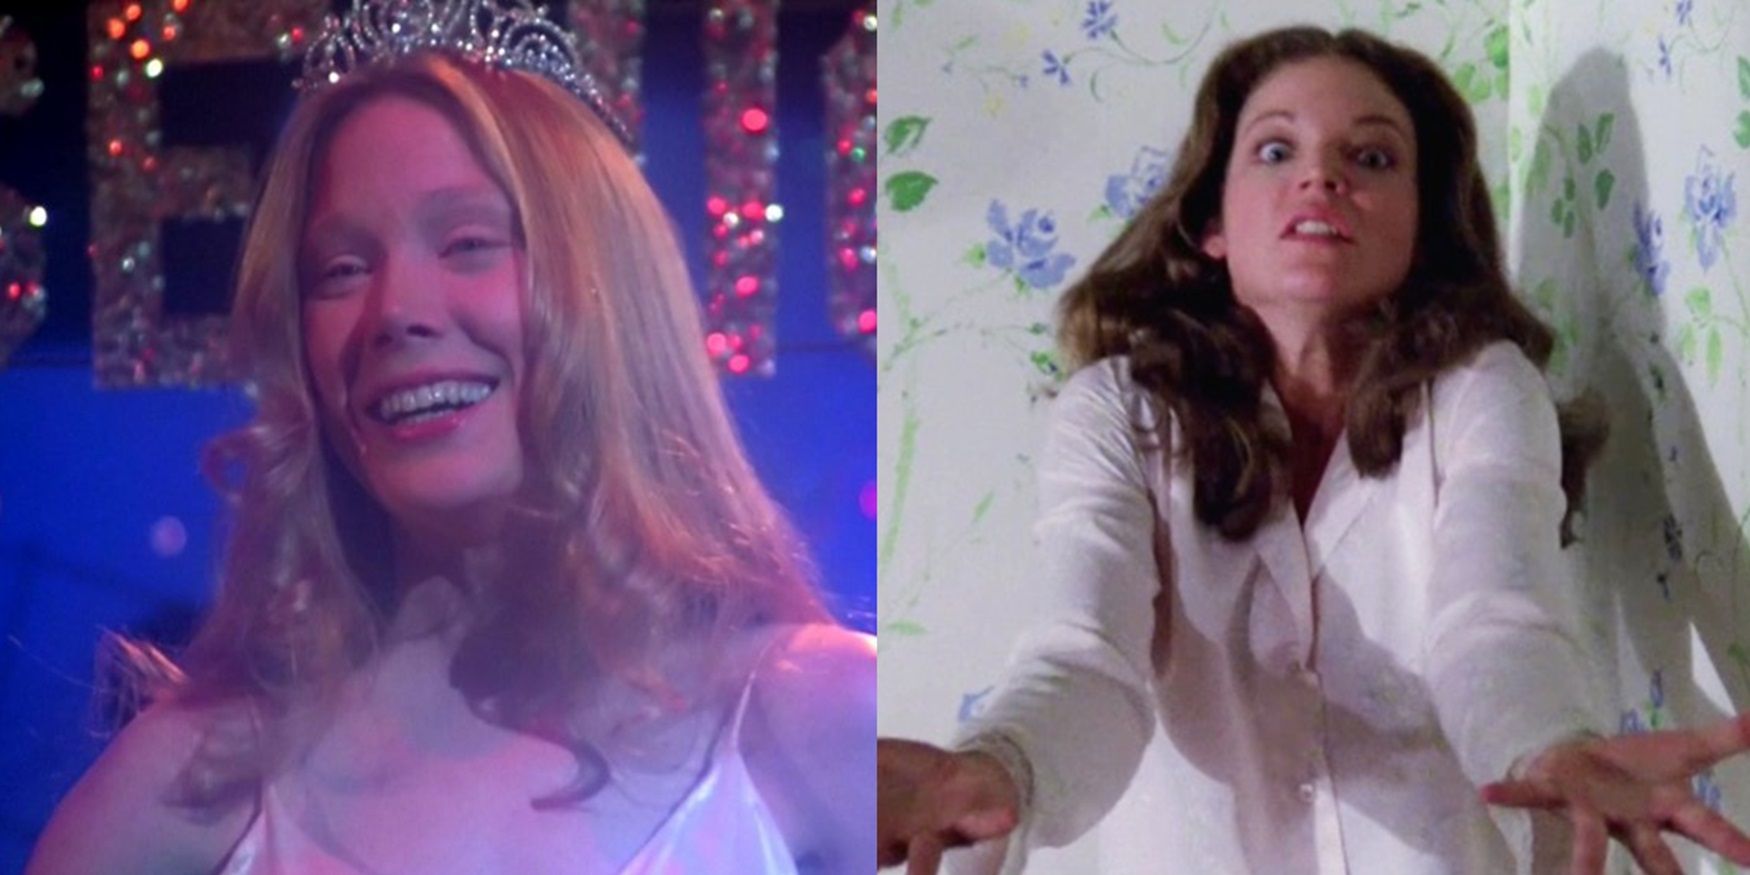 Split_image_of_Sissy_Spacek_in_Carrie_and_Amy_Irving_in_The_Fury